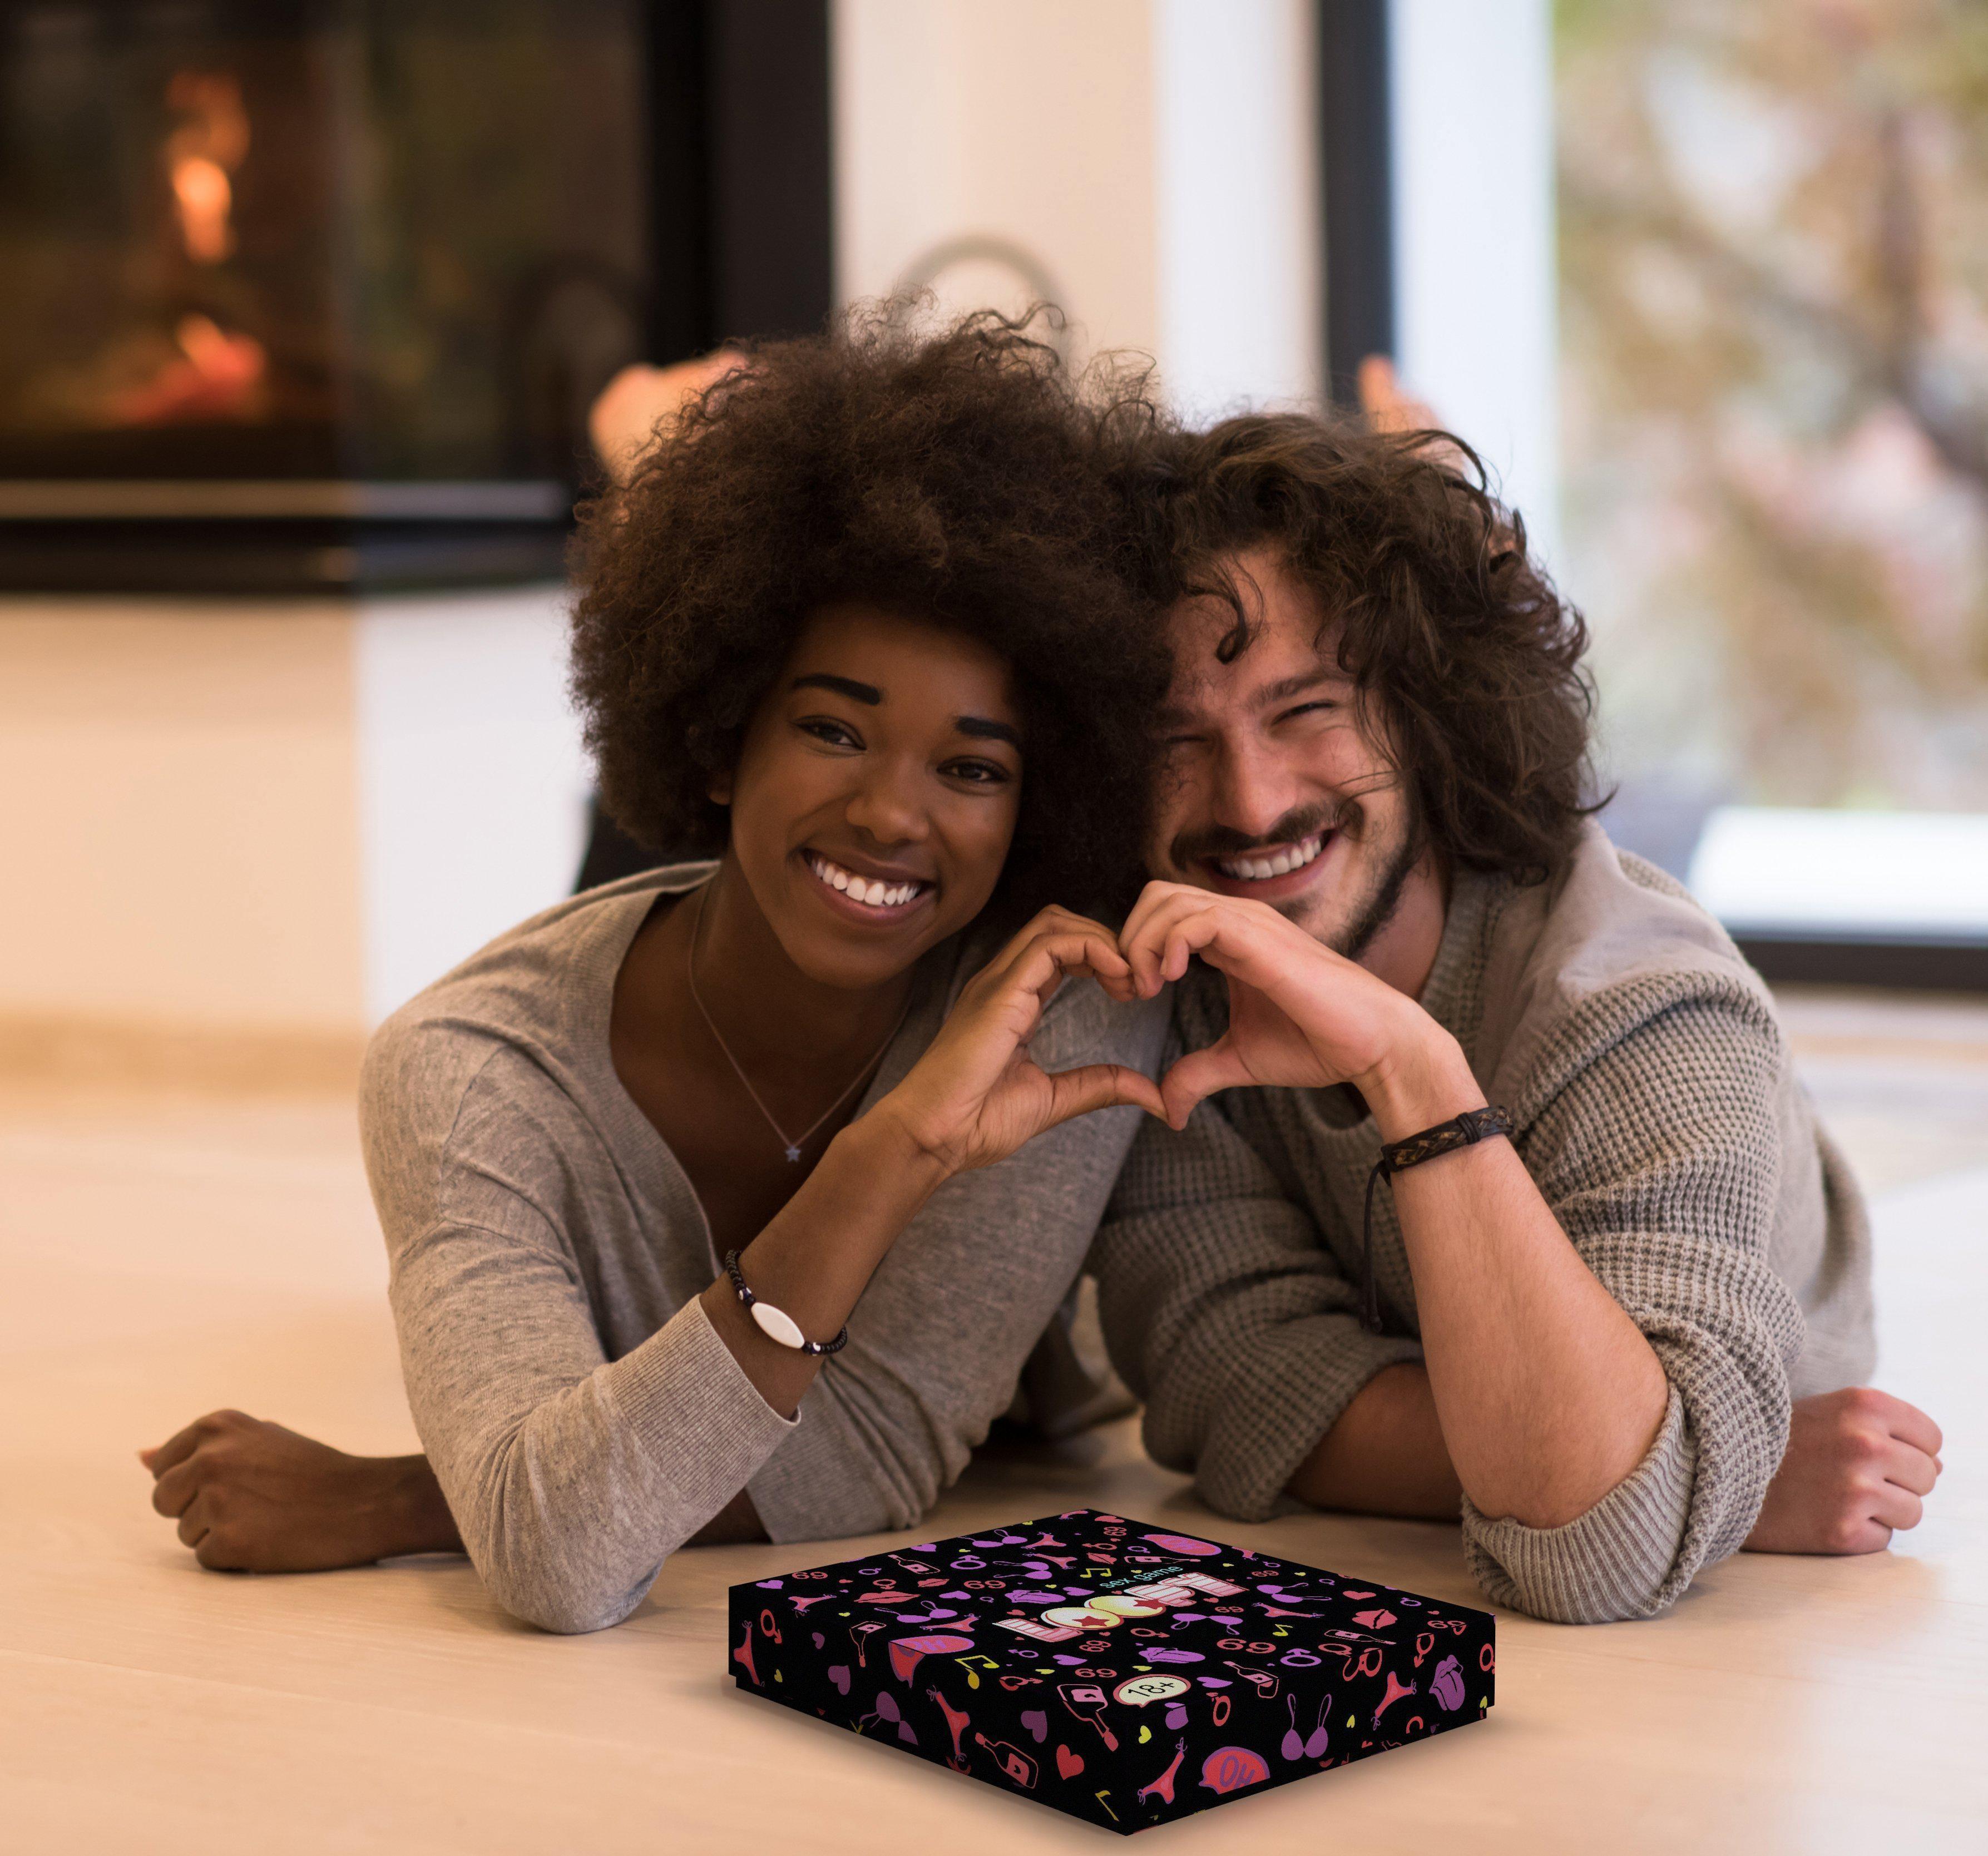 Game for Couples LOOPY - Perfect Couples Gifts